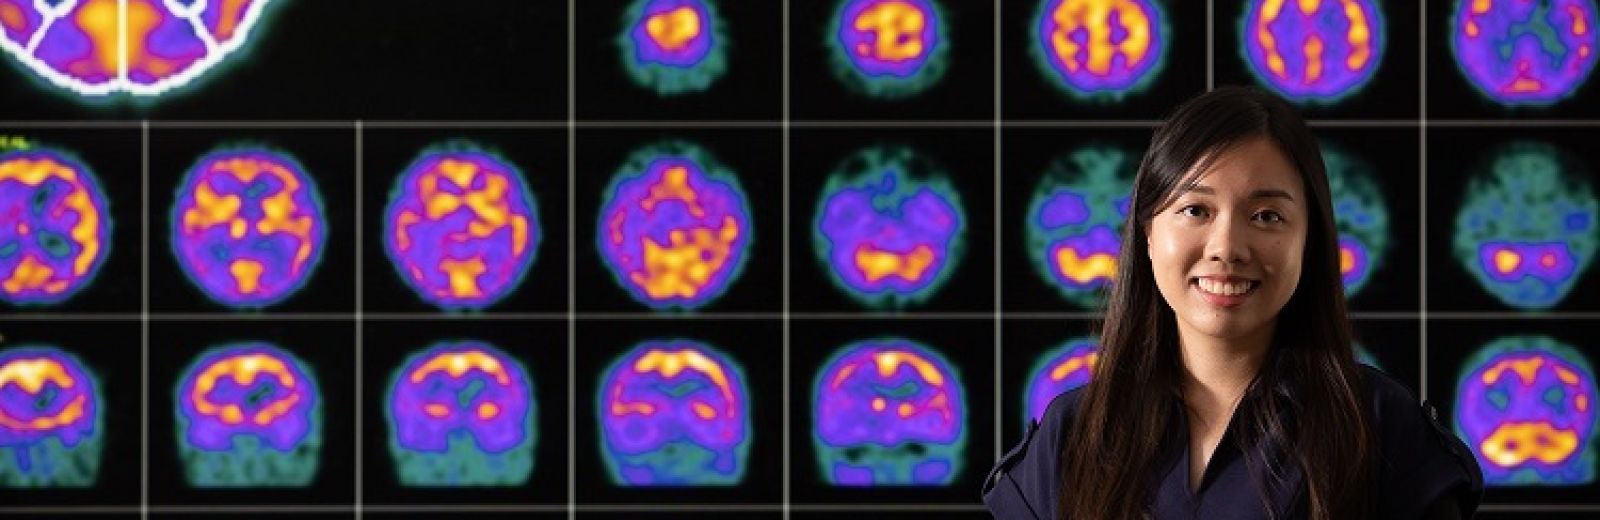 The university of leeds master course in medical imaging offers a broad range of core and optional modules covering the theory and physics of imaging